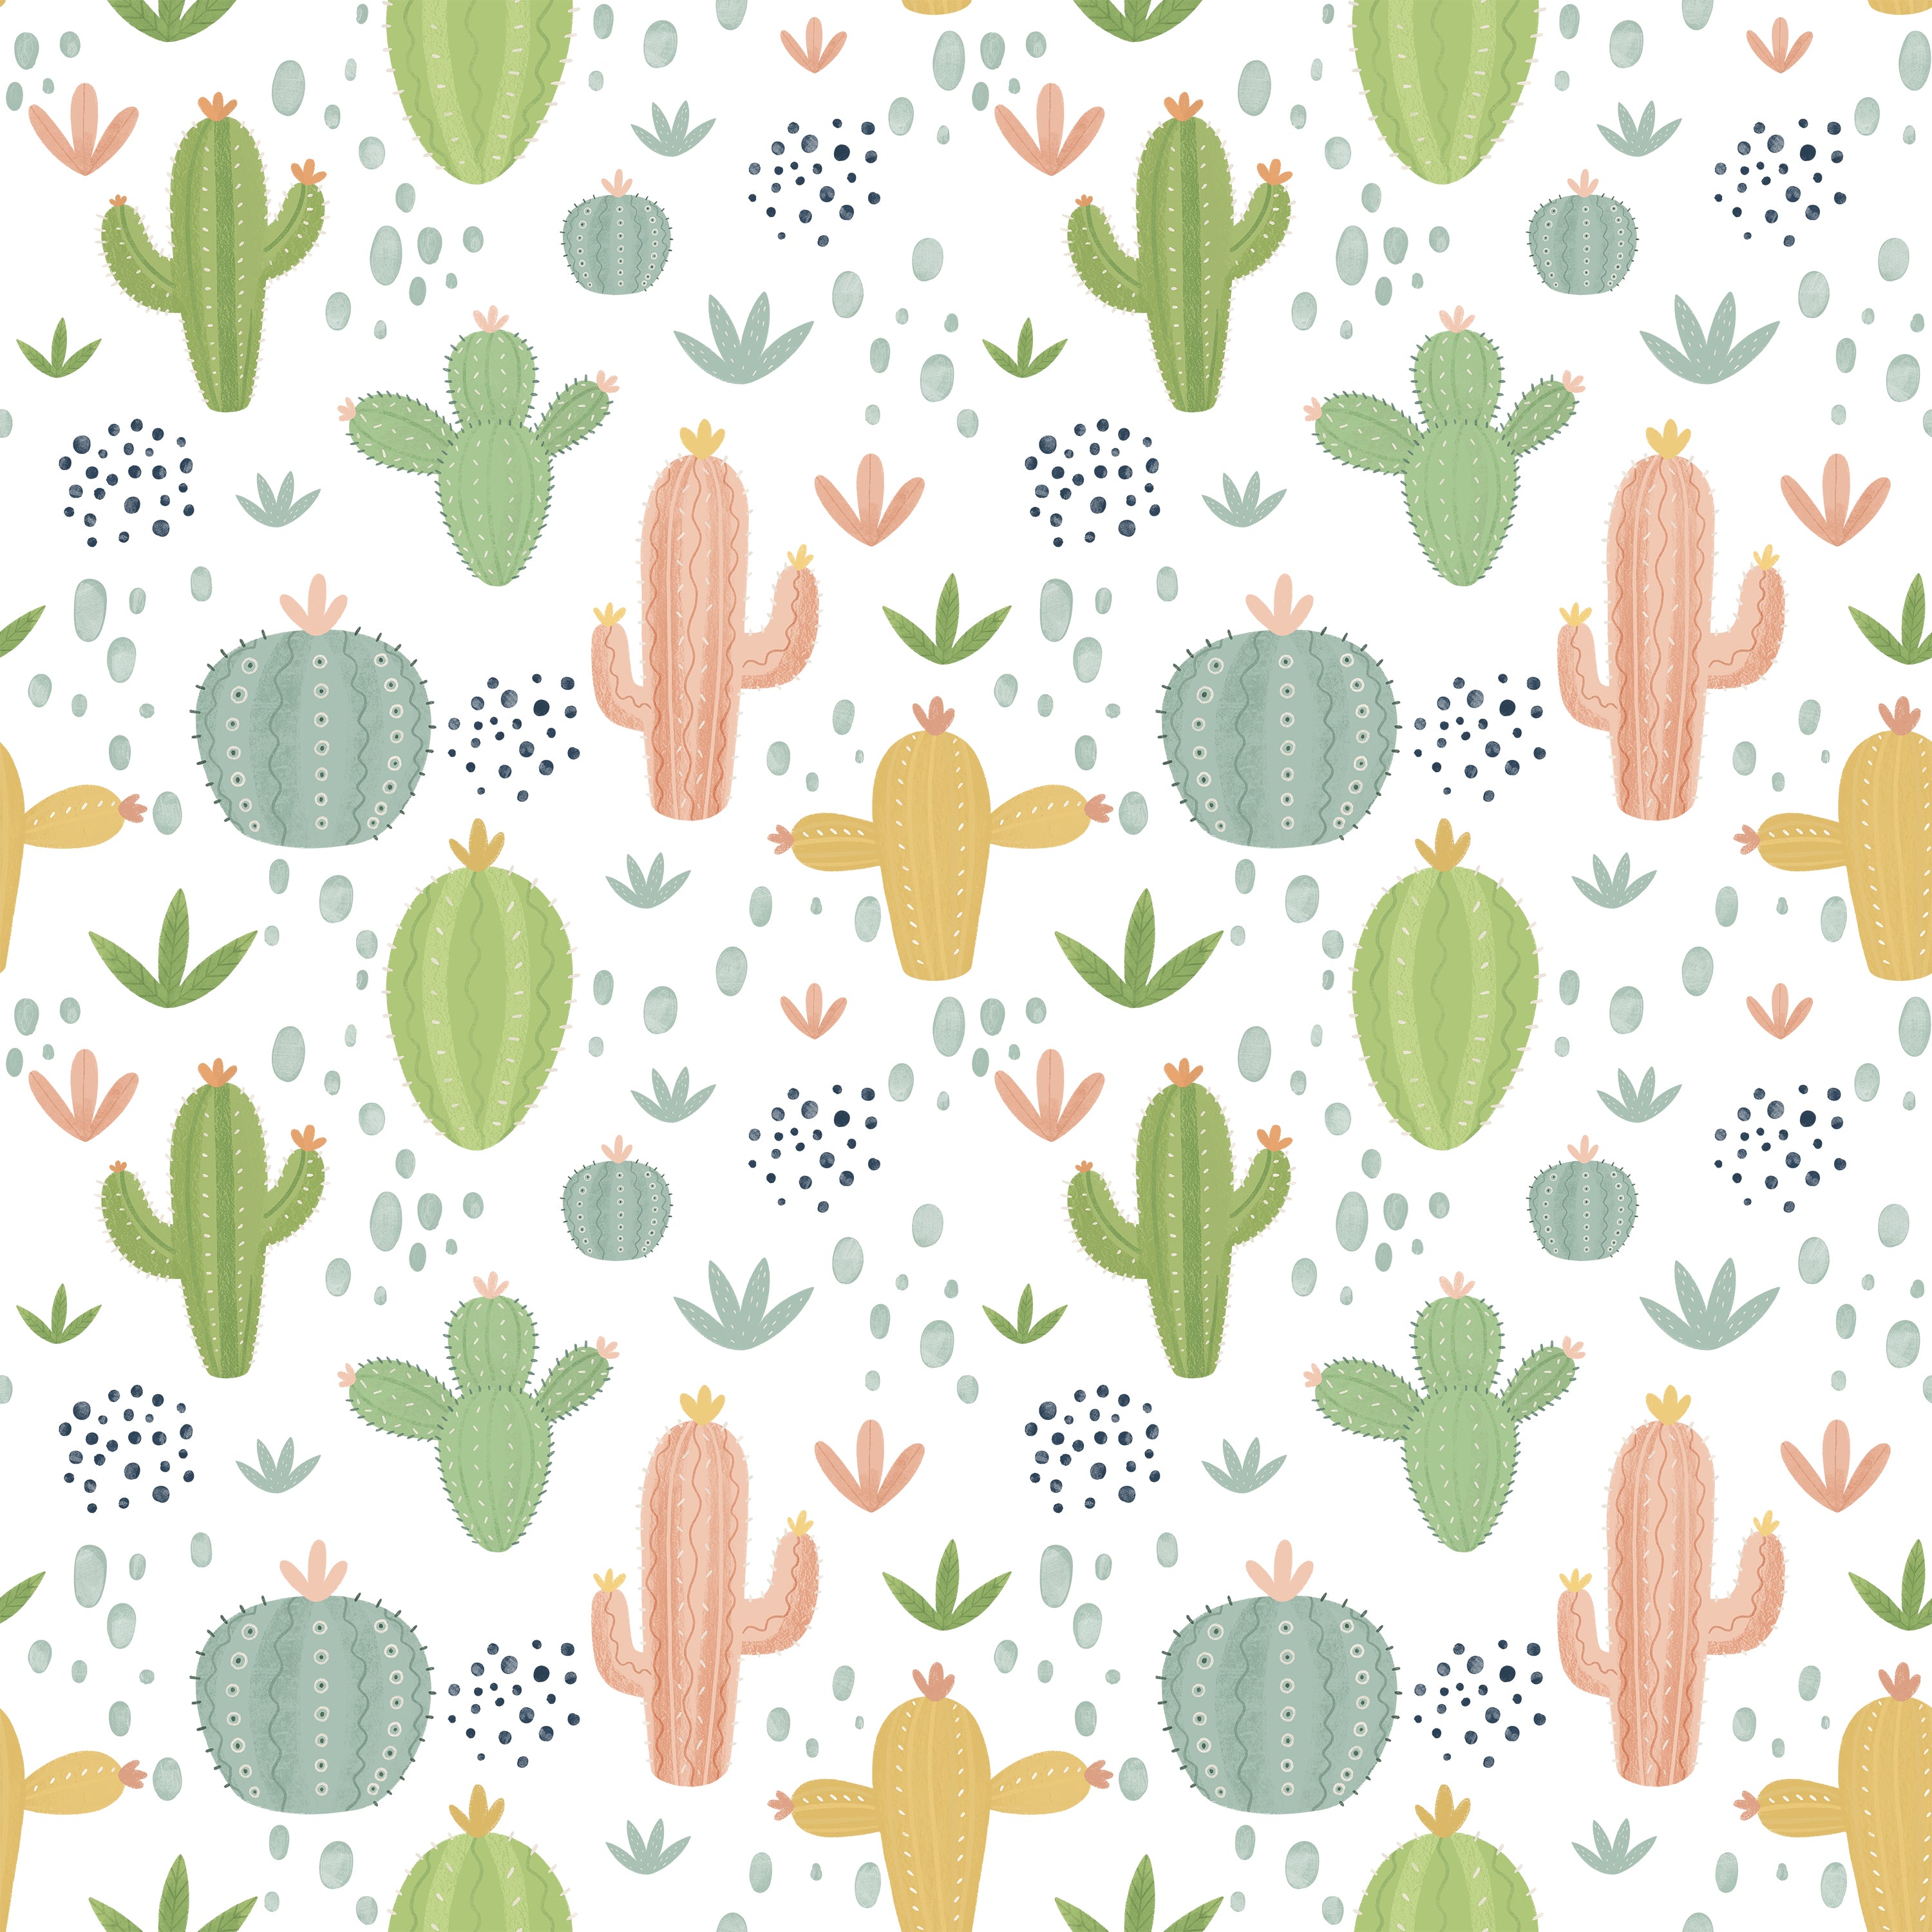 Cheerful and playful 'Colourful Cactus Kids Wallpaper' featuring an assortment of green and pastel-colored cacti mixed with orange and yellow flowers on a speckled white background, perfect for adding a touch of nature-inspired fun to children's spaces